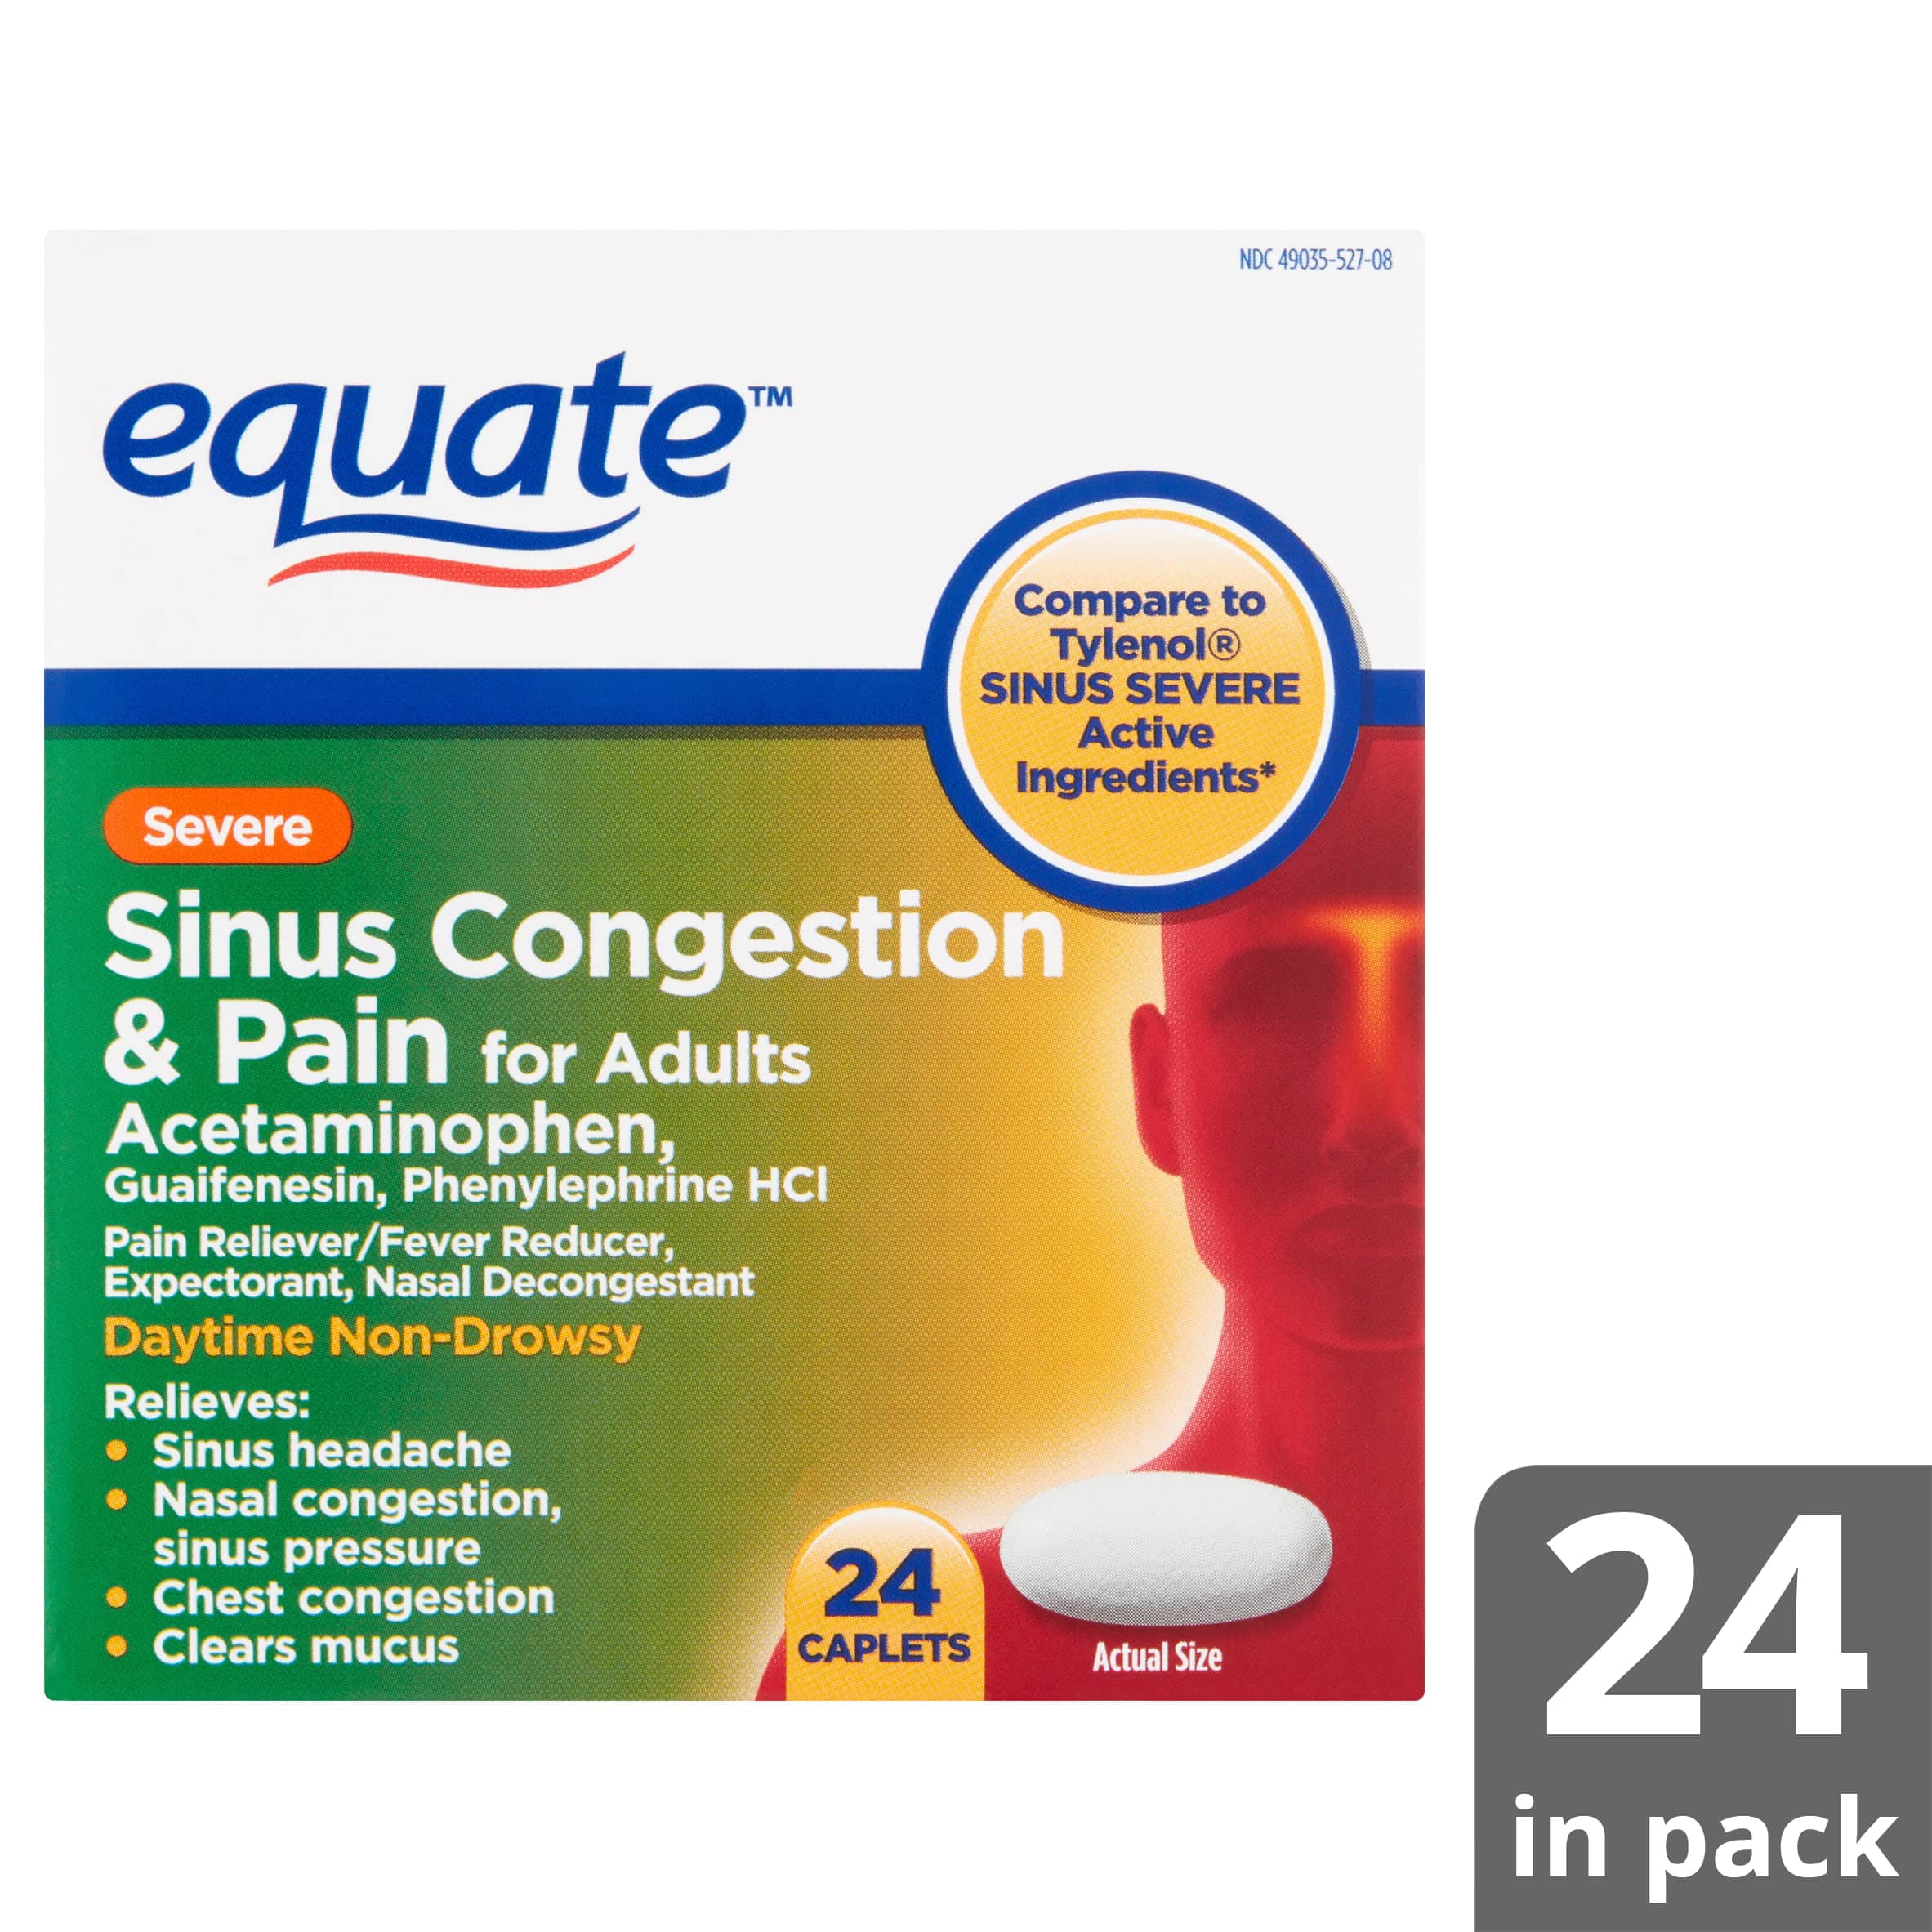 Best Over The Counter Medication For Sinus Drainage